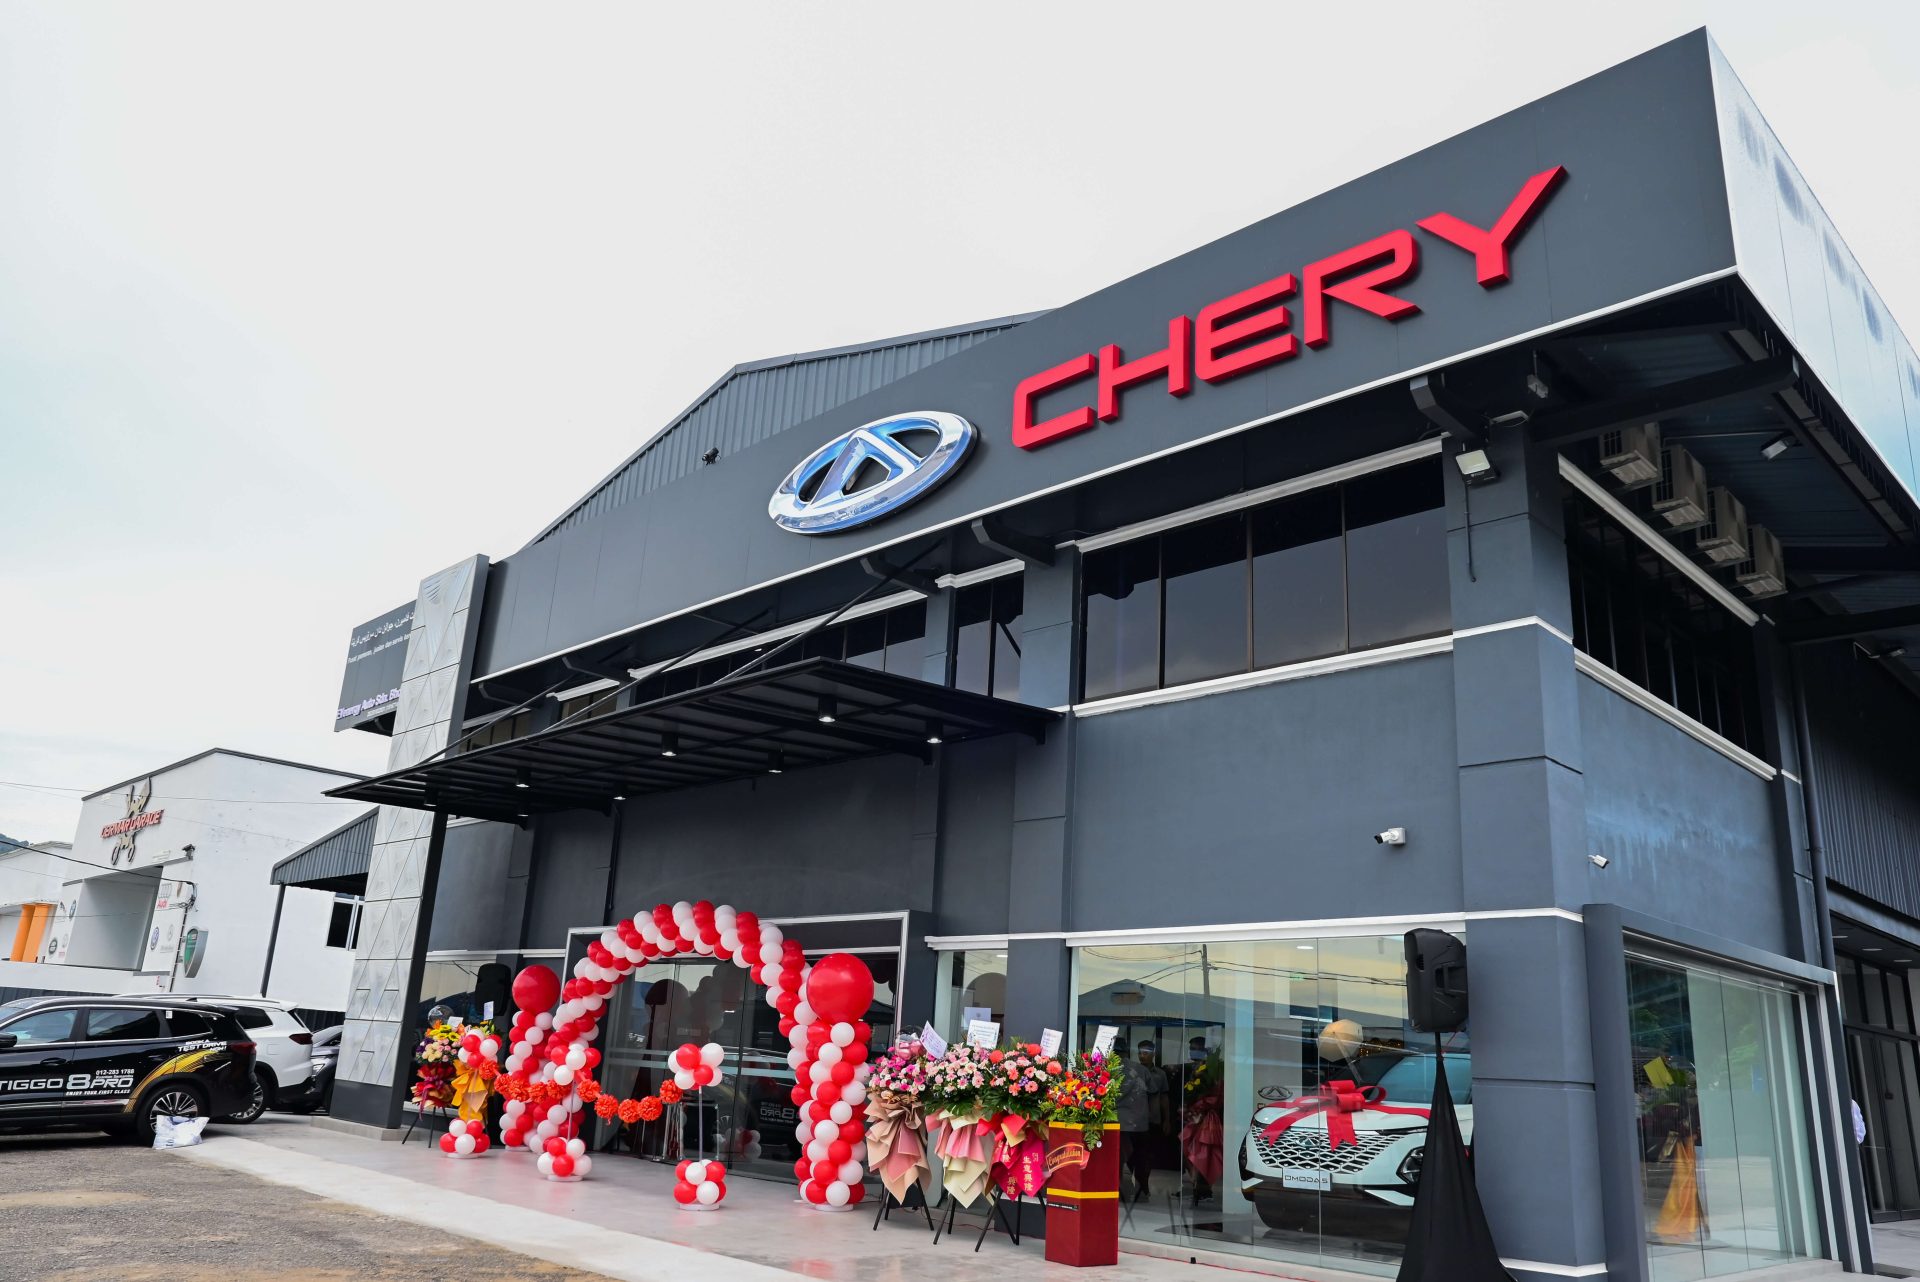 CHERY Malaysia Celebrating the Grand Opening of the First and Largest 4S Flagship Chery Showroom in East Coast Malaysia